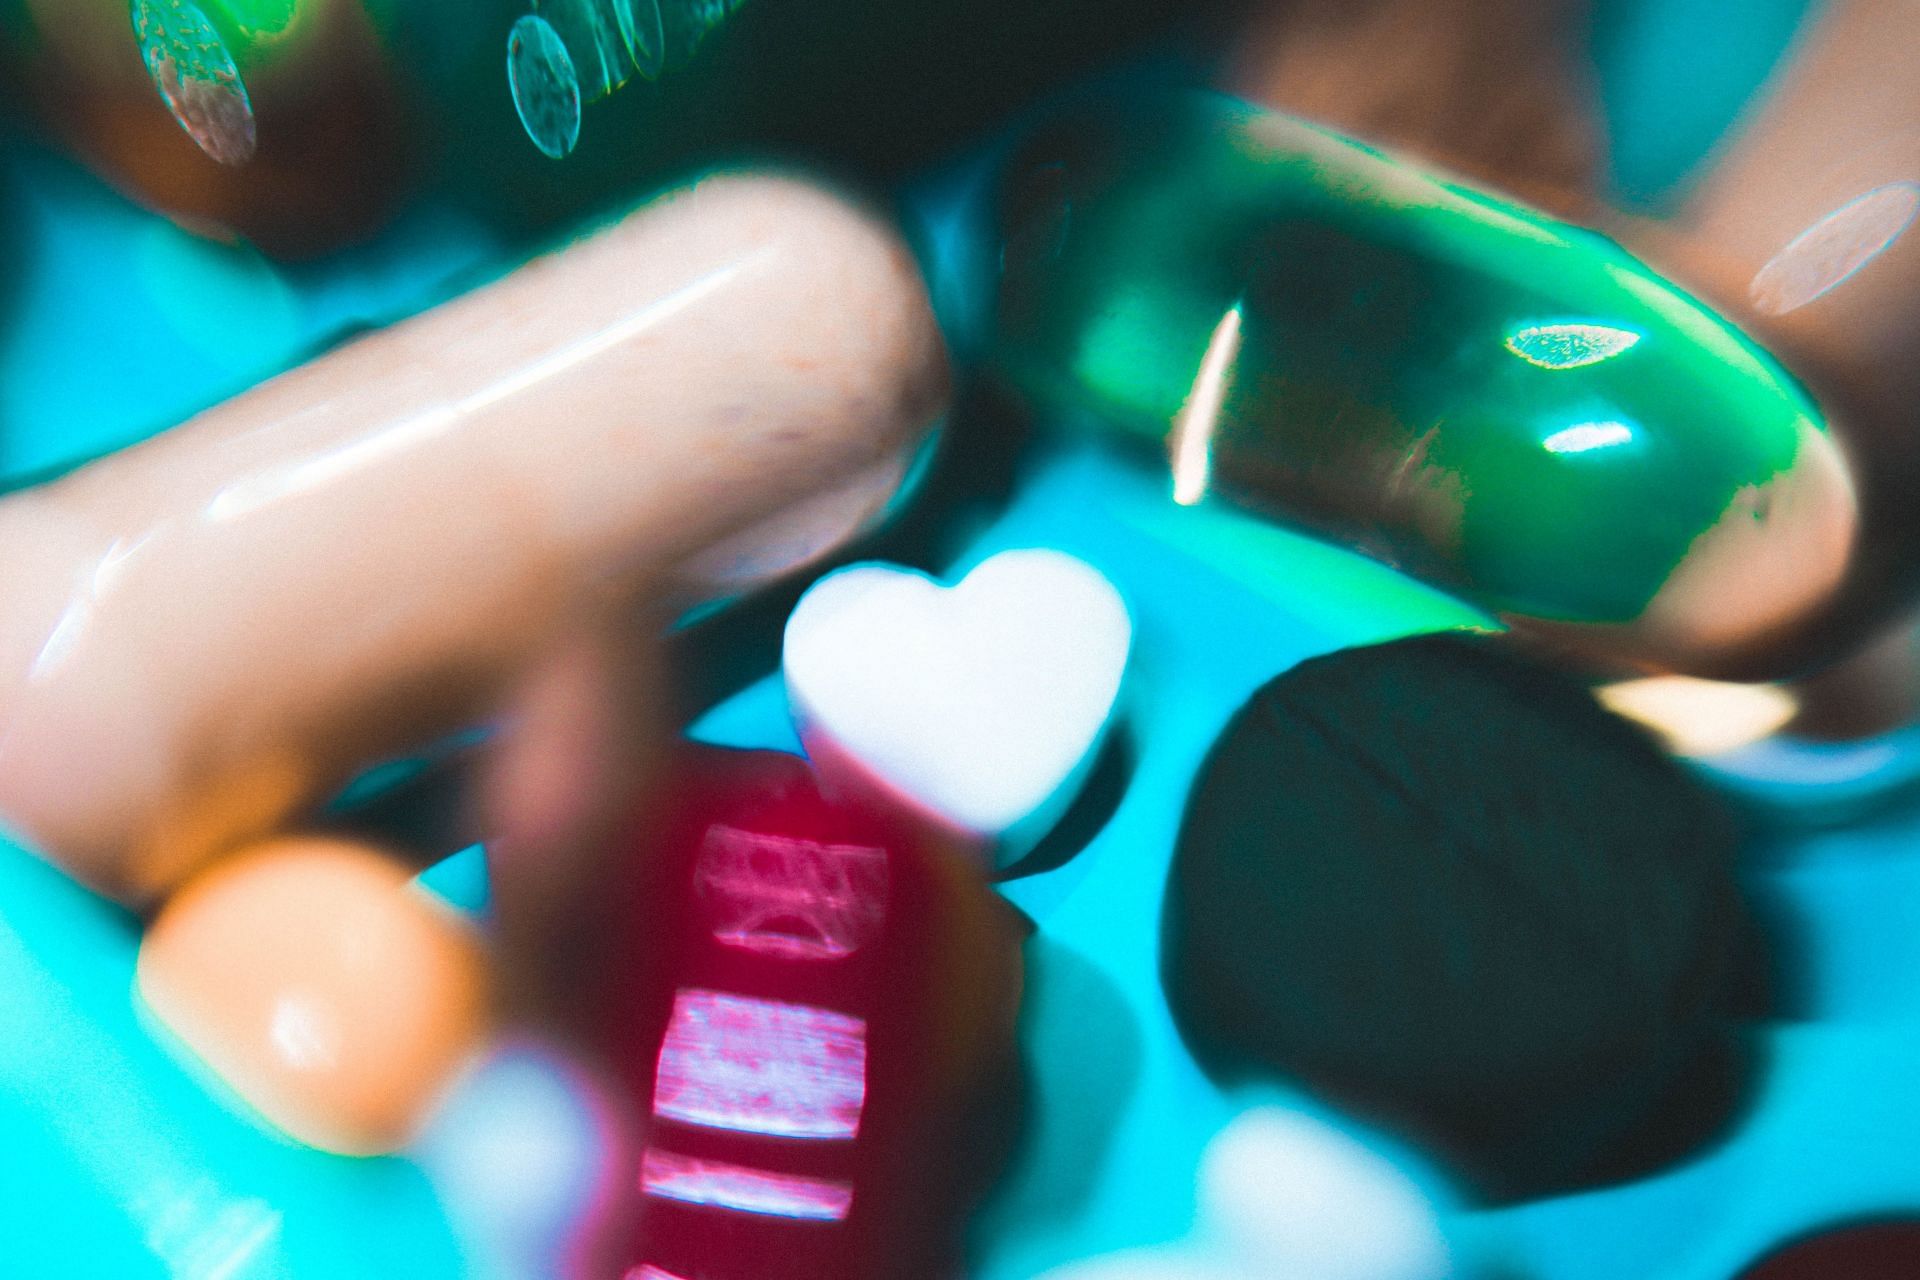 Which medications can cause weight loss? (Image via Unsplash/ Nastya Dulhiier)